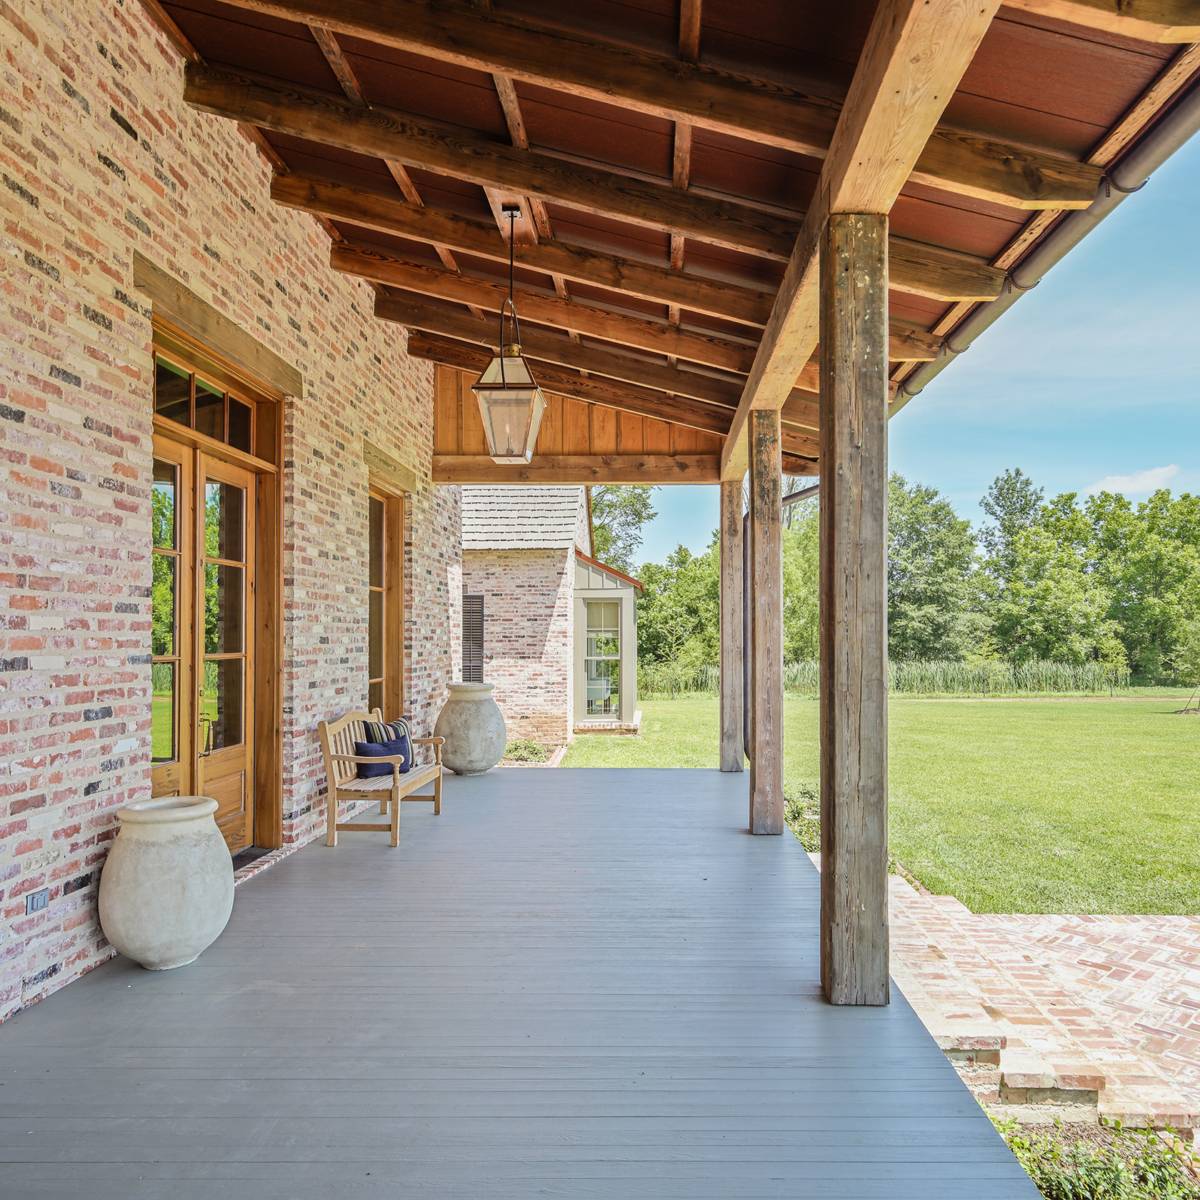 Exterior view of the front porch at Louisiana Rustic, a custom home designed and built by Farmer Payne Architects.